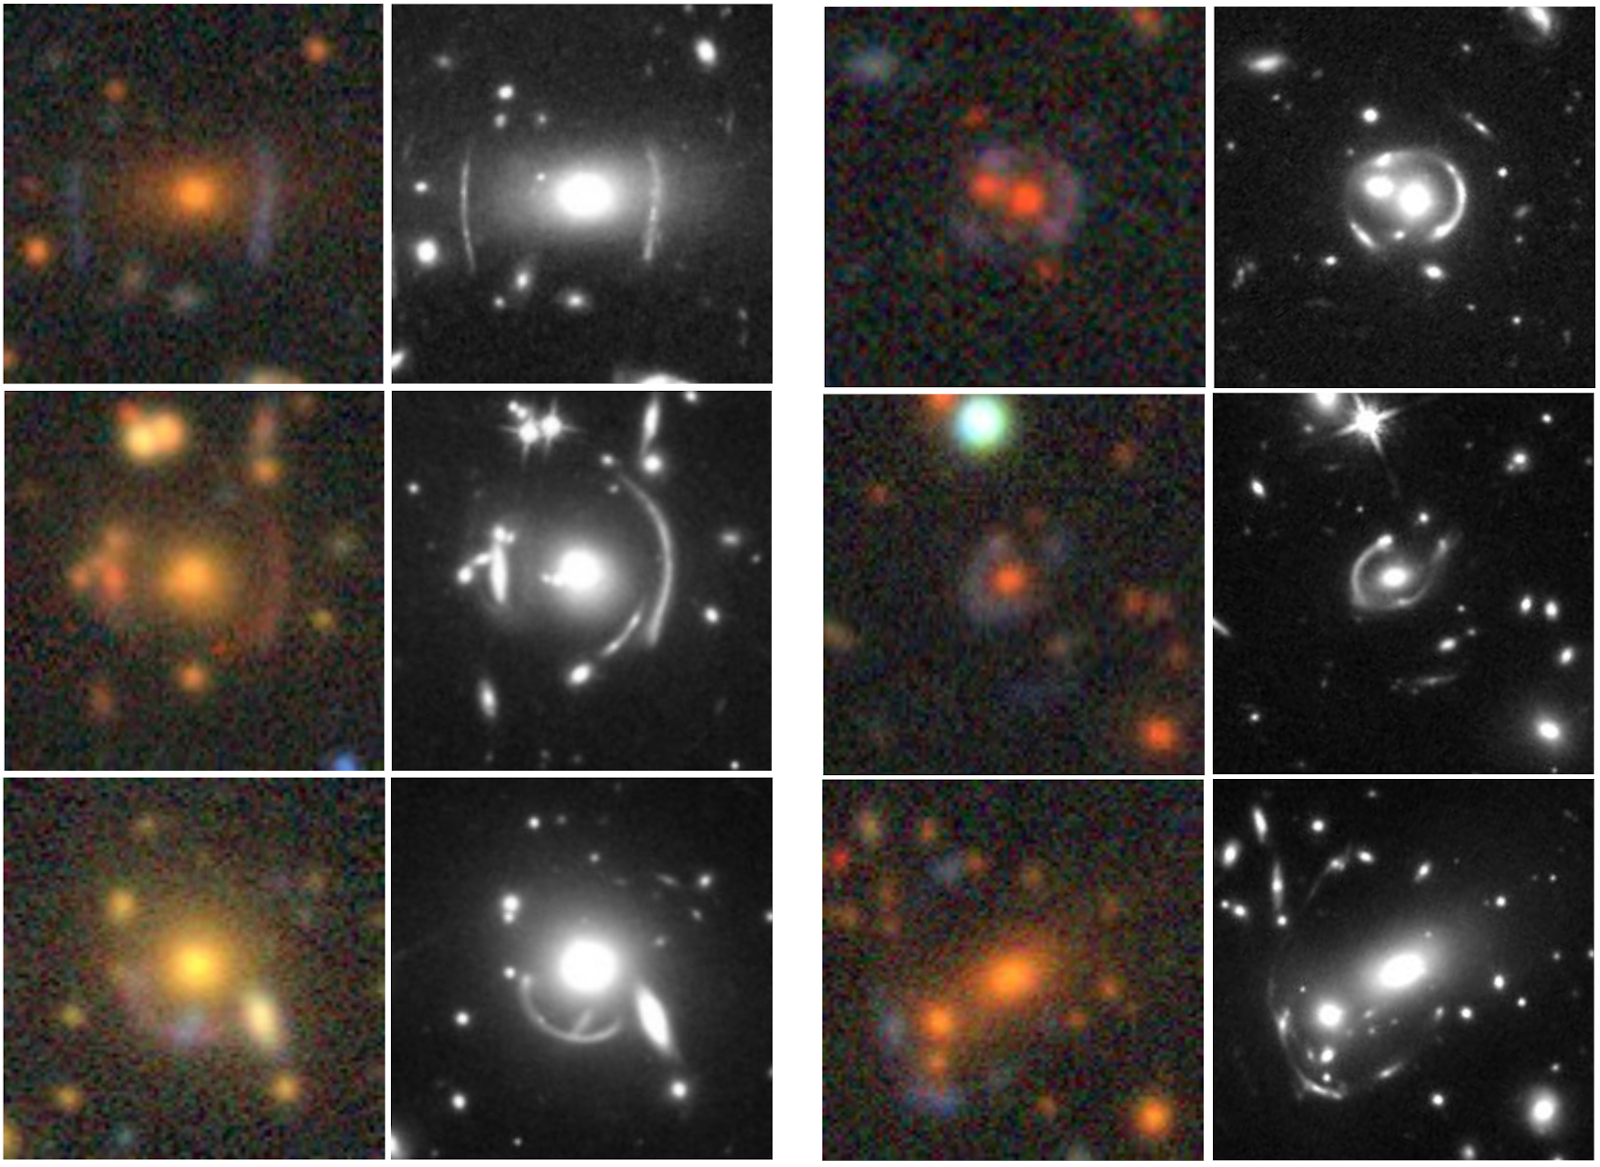 Images - These two columns show side-by-side comparisons of gravitational lens candidates imaged by the ground-based Dark Energy Camera Legacy Survey (color) and the Hubble Space Telescope (black and white). (Credit: Dark Energy Camera Legacy Survey, Hubble Space Telescope)